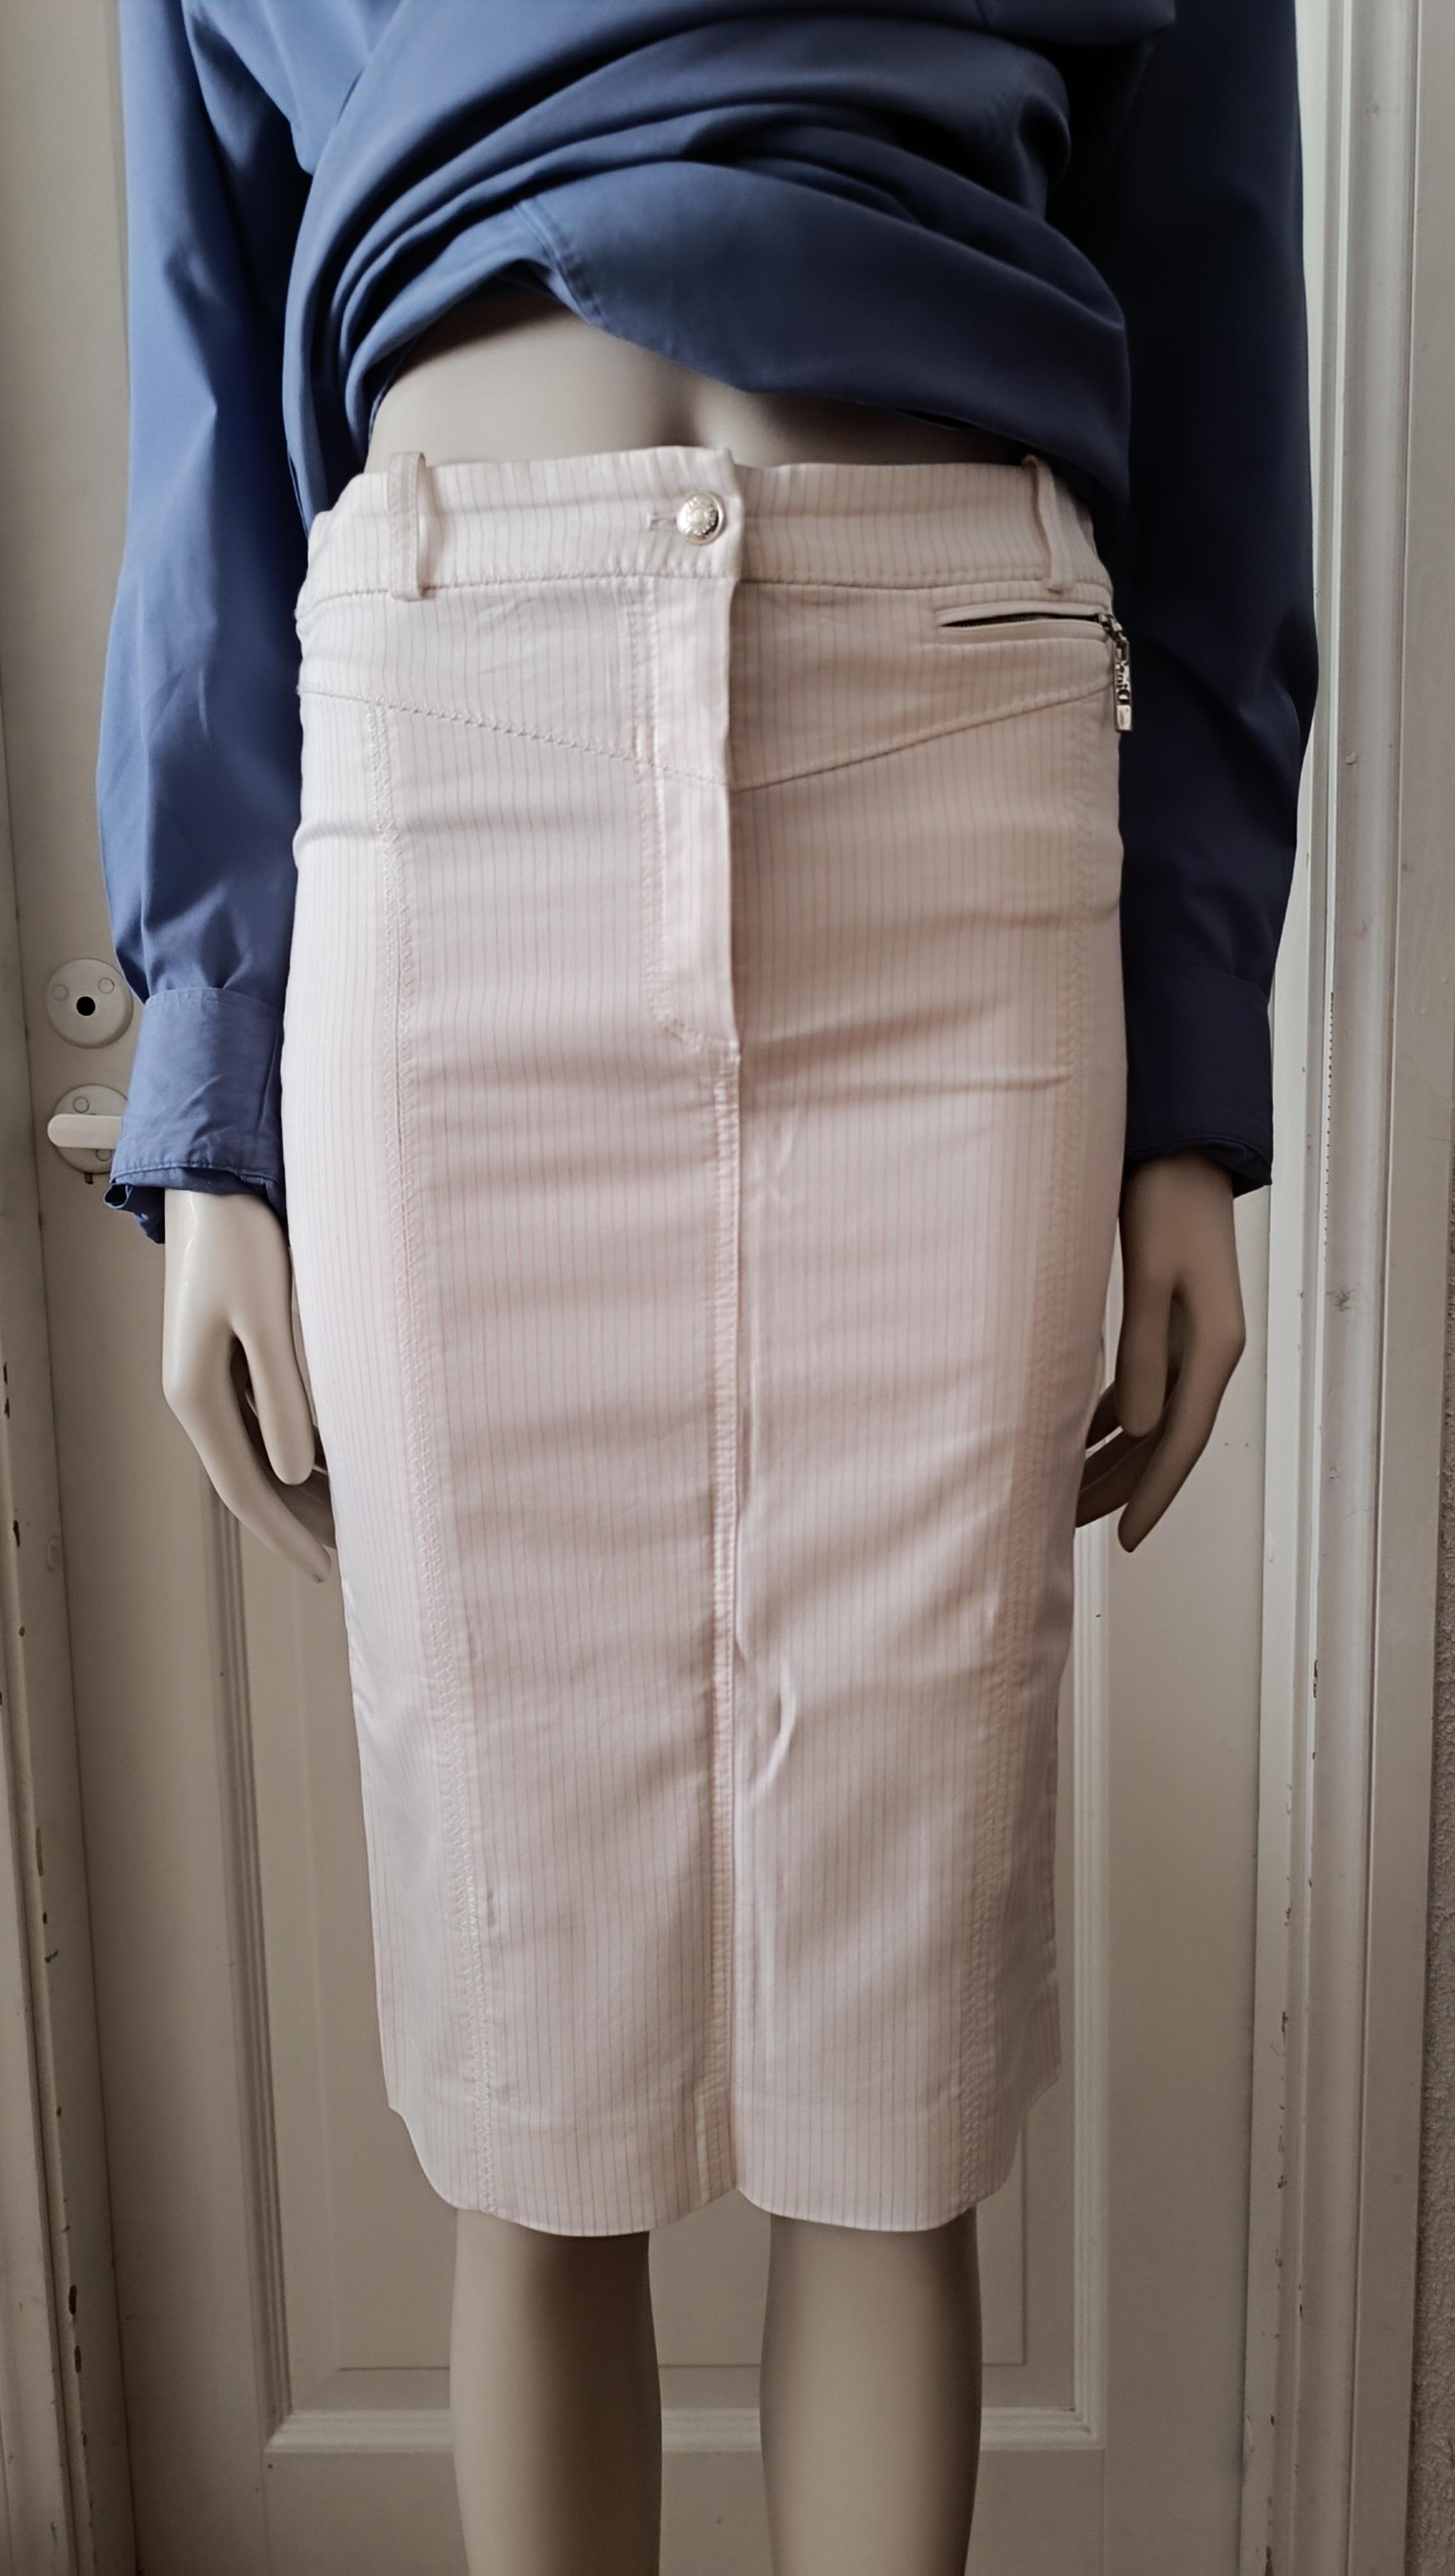 Christian Dior & John Galliano 2005 pencil cotton Skirt logo buttonY2K
John Galliano for Christian Dior
Collection: Christian Dior 2005
Country of production: Portugal
Christian Dior style: 5P12033470
Dimensions
Marked Size: 38 Fr 6 US 42 It
Color: